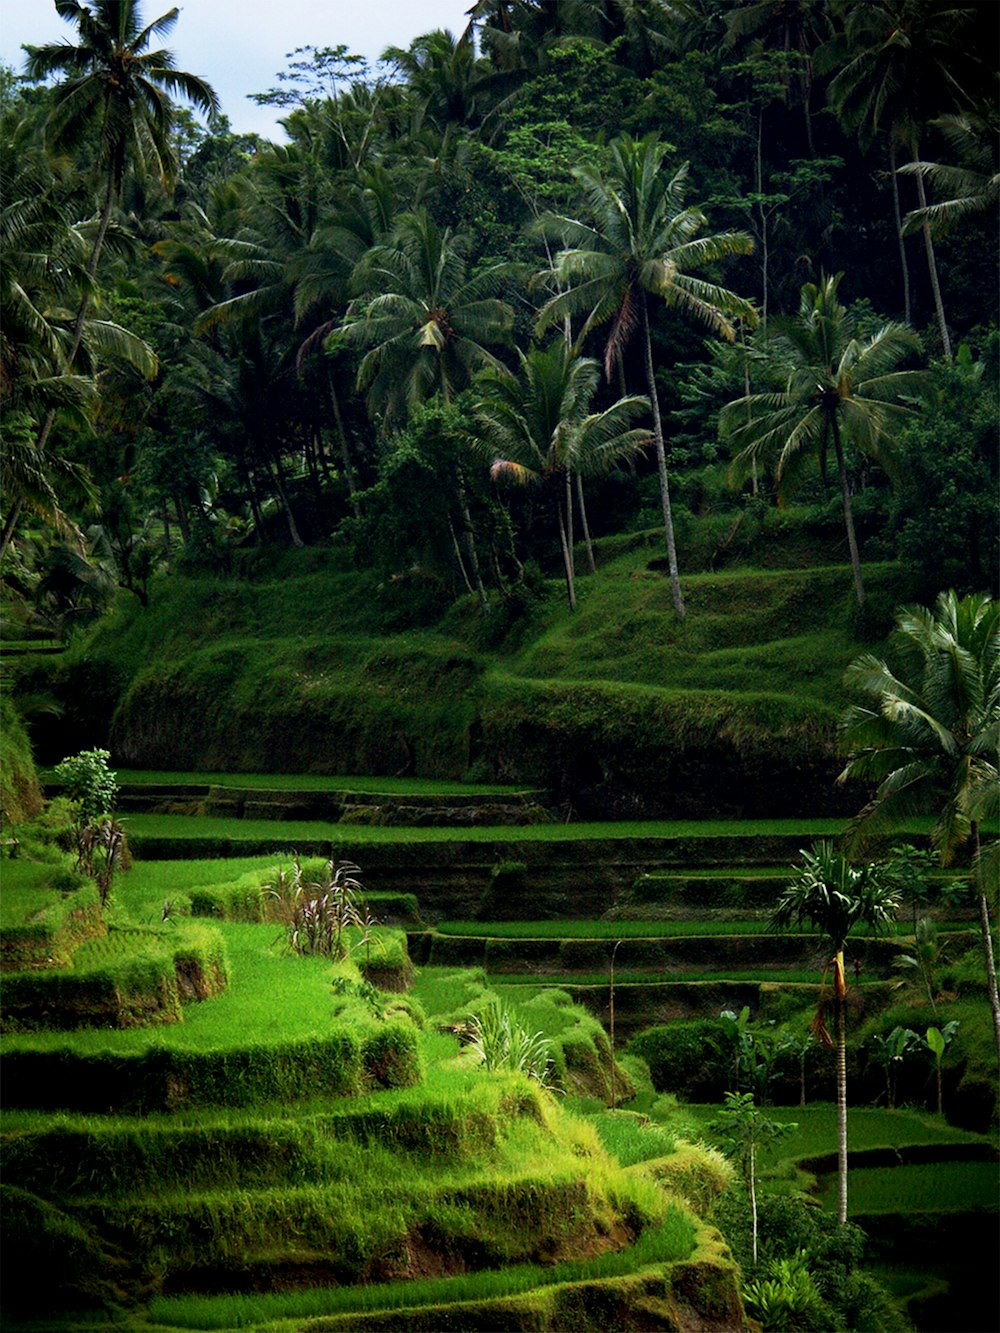 rice terraces and green trees during daytime